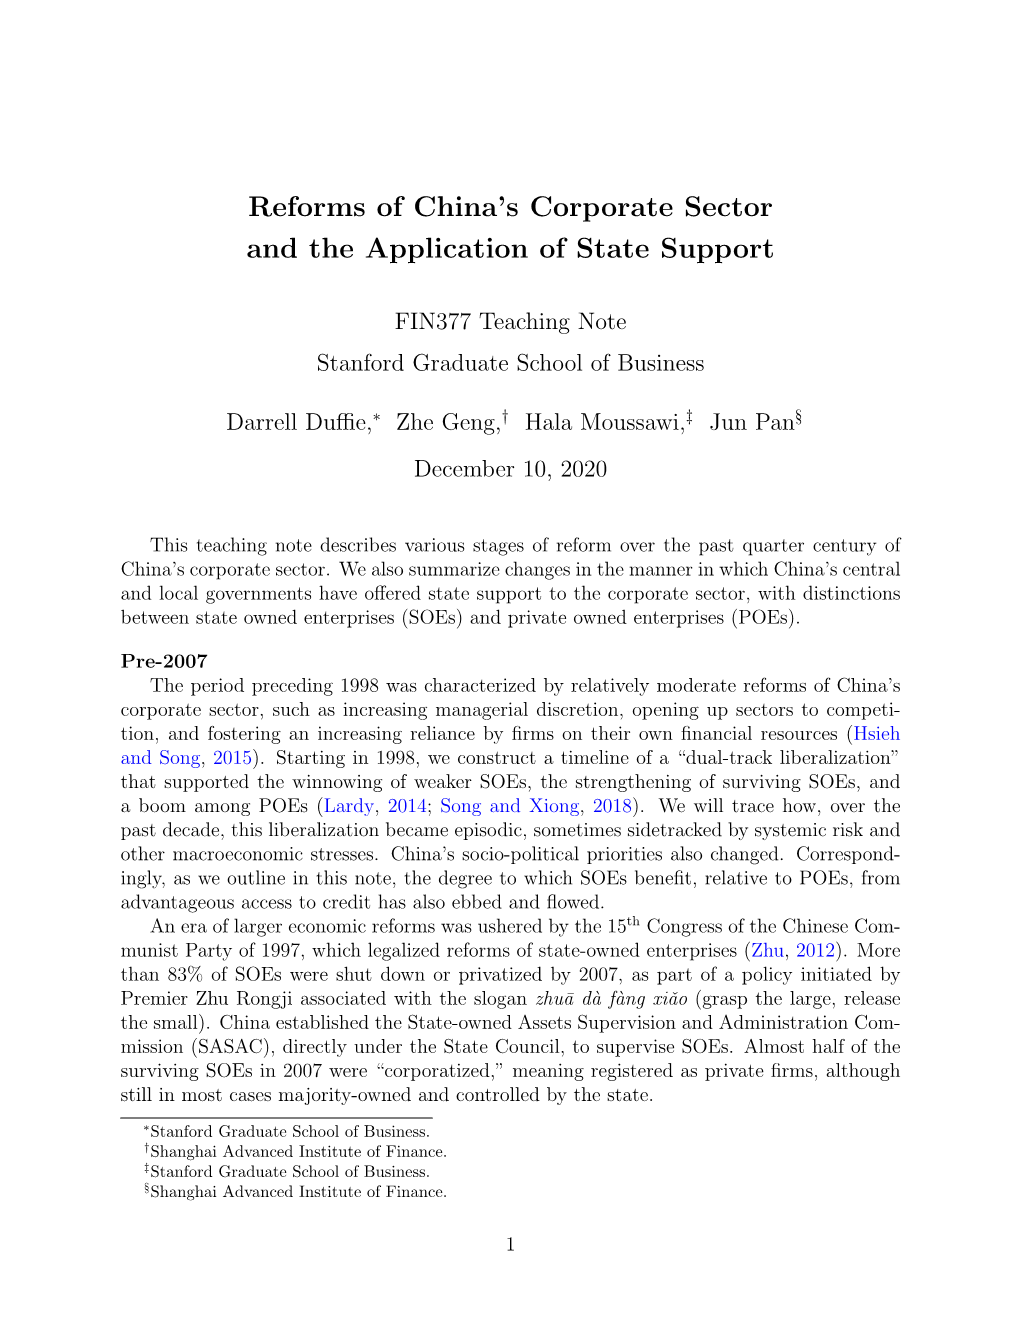 Reforms of China's Corporate Sector and the Application of State Support